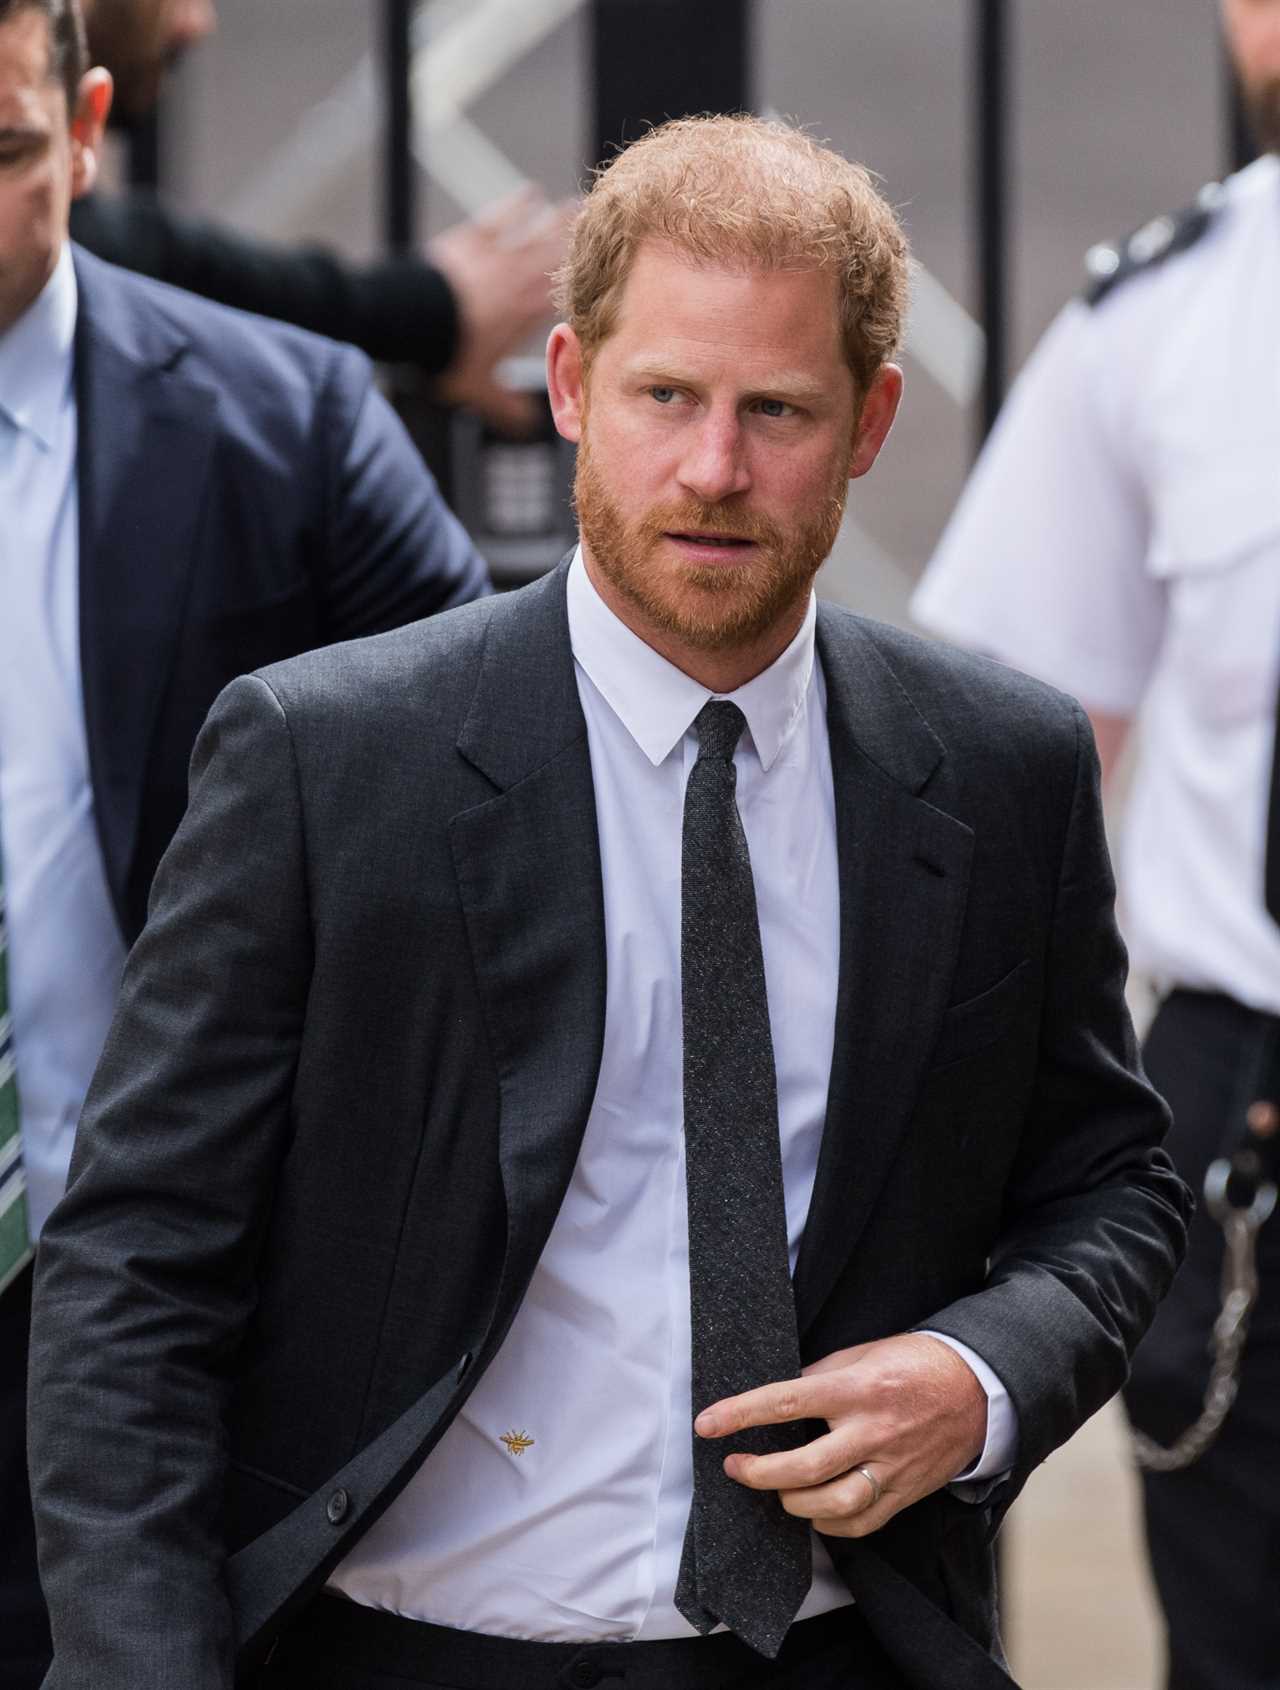 Prince Harry ‘DID tell US officials about drug use’ – as visa row rumbles on